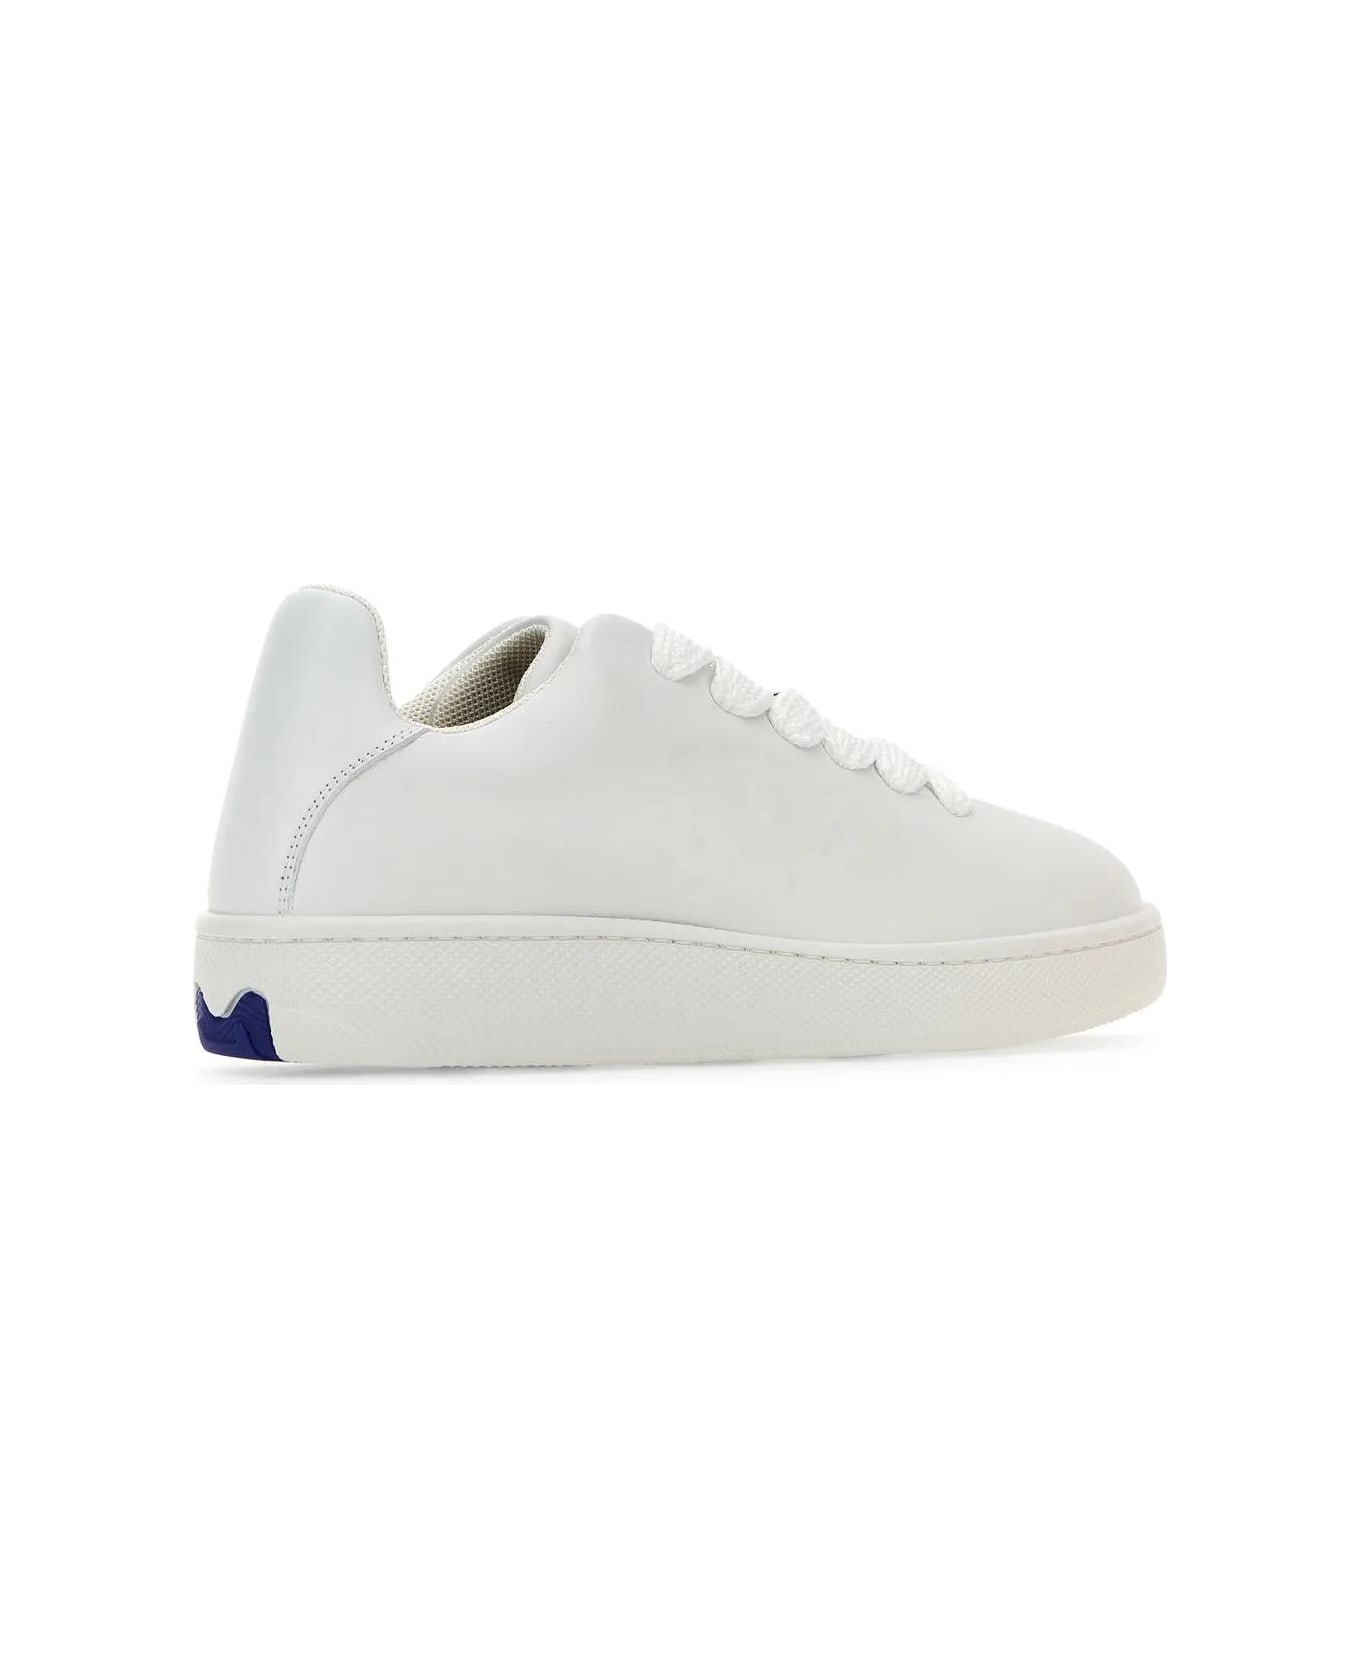 Burberry White Leather Box Sneakers - WHITE